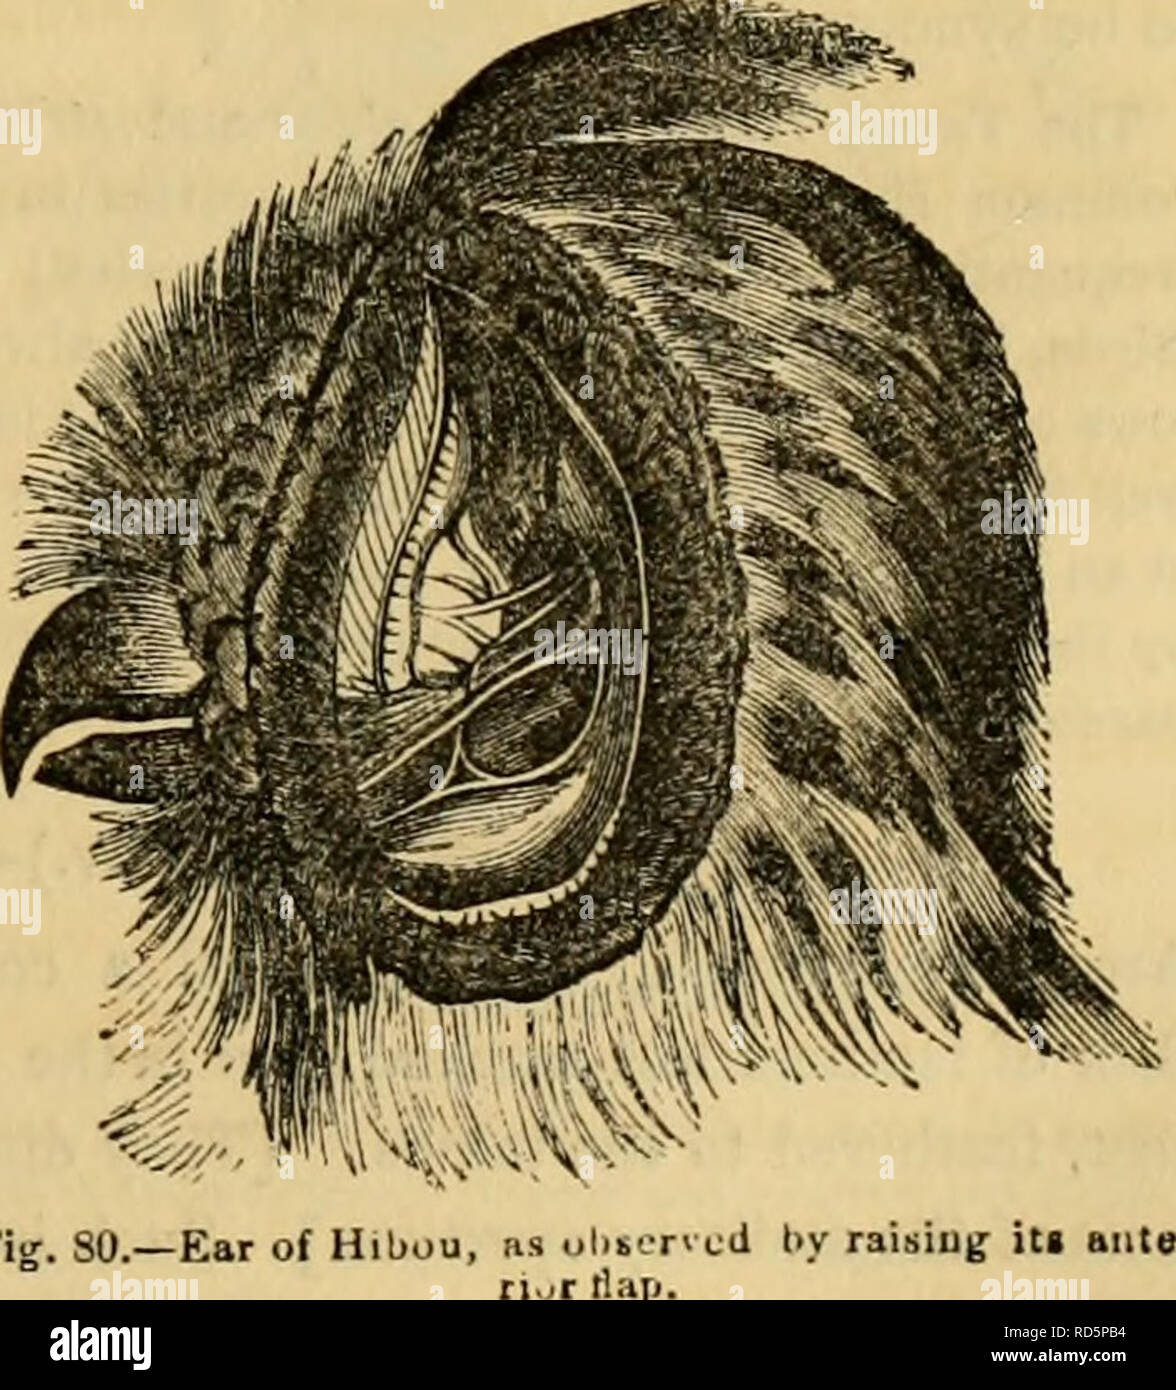 Cuvier's animal kingdom : arranged according to its organization. Animals.  The Owls {Strix, Linn.),— Which may be divided according to their  head-tufts, the size of their ears, the extent of the